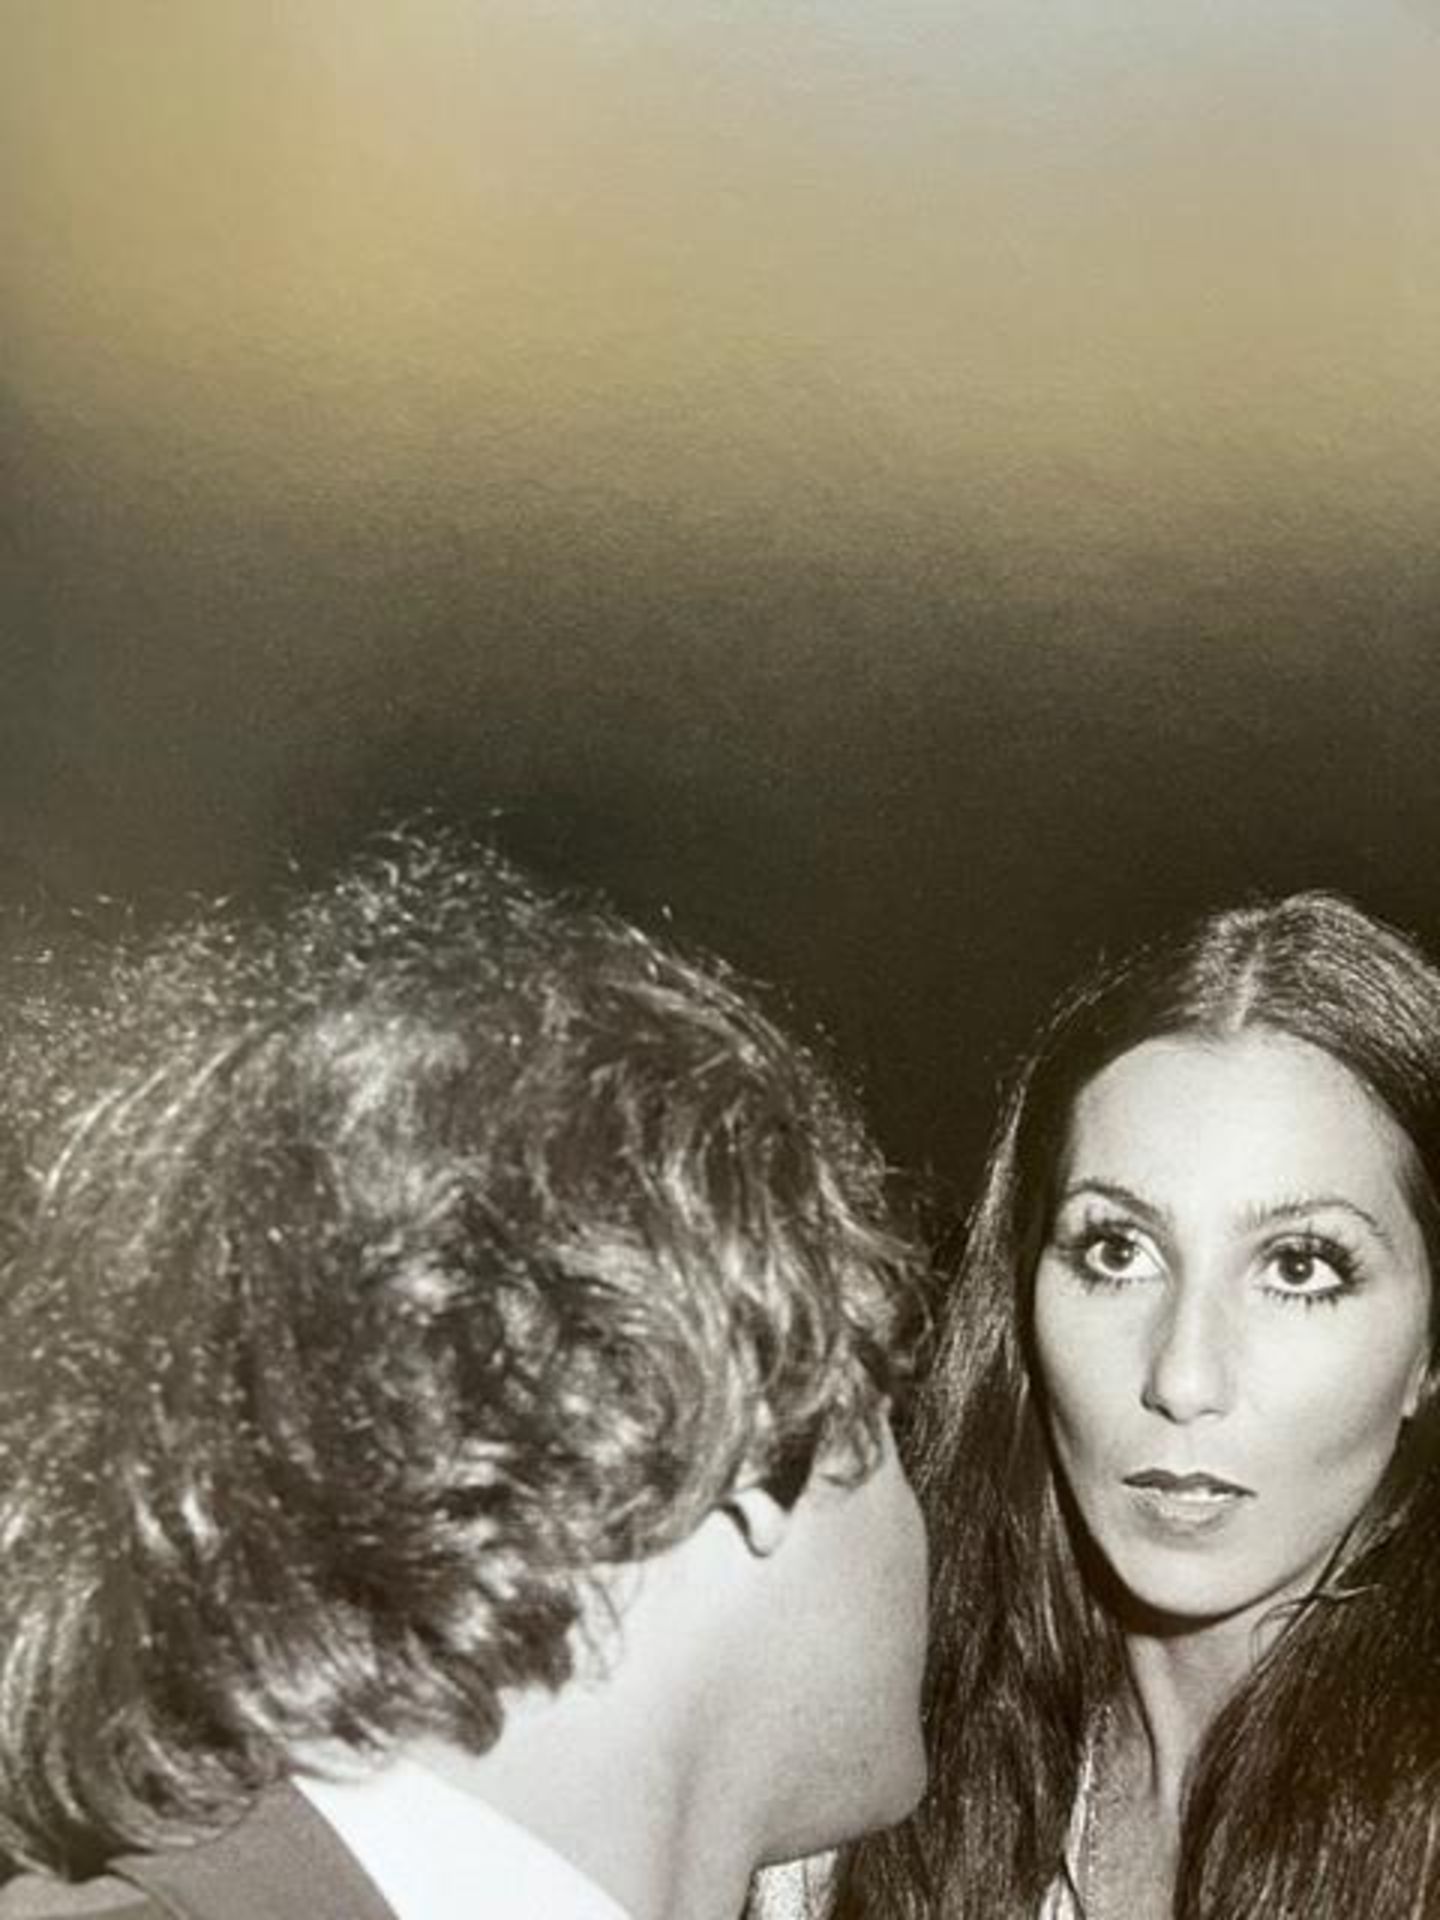 Ian Schrager "Cher with Steve" Print. - Image 4 of 6